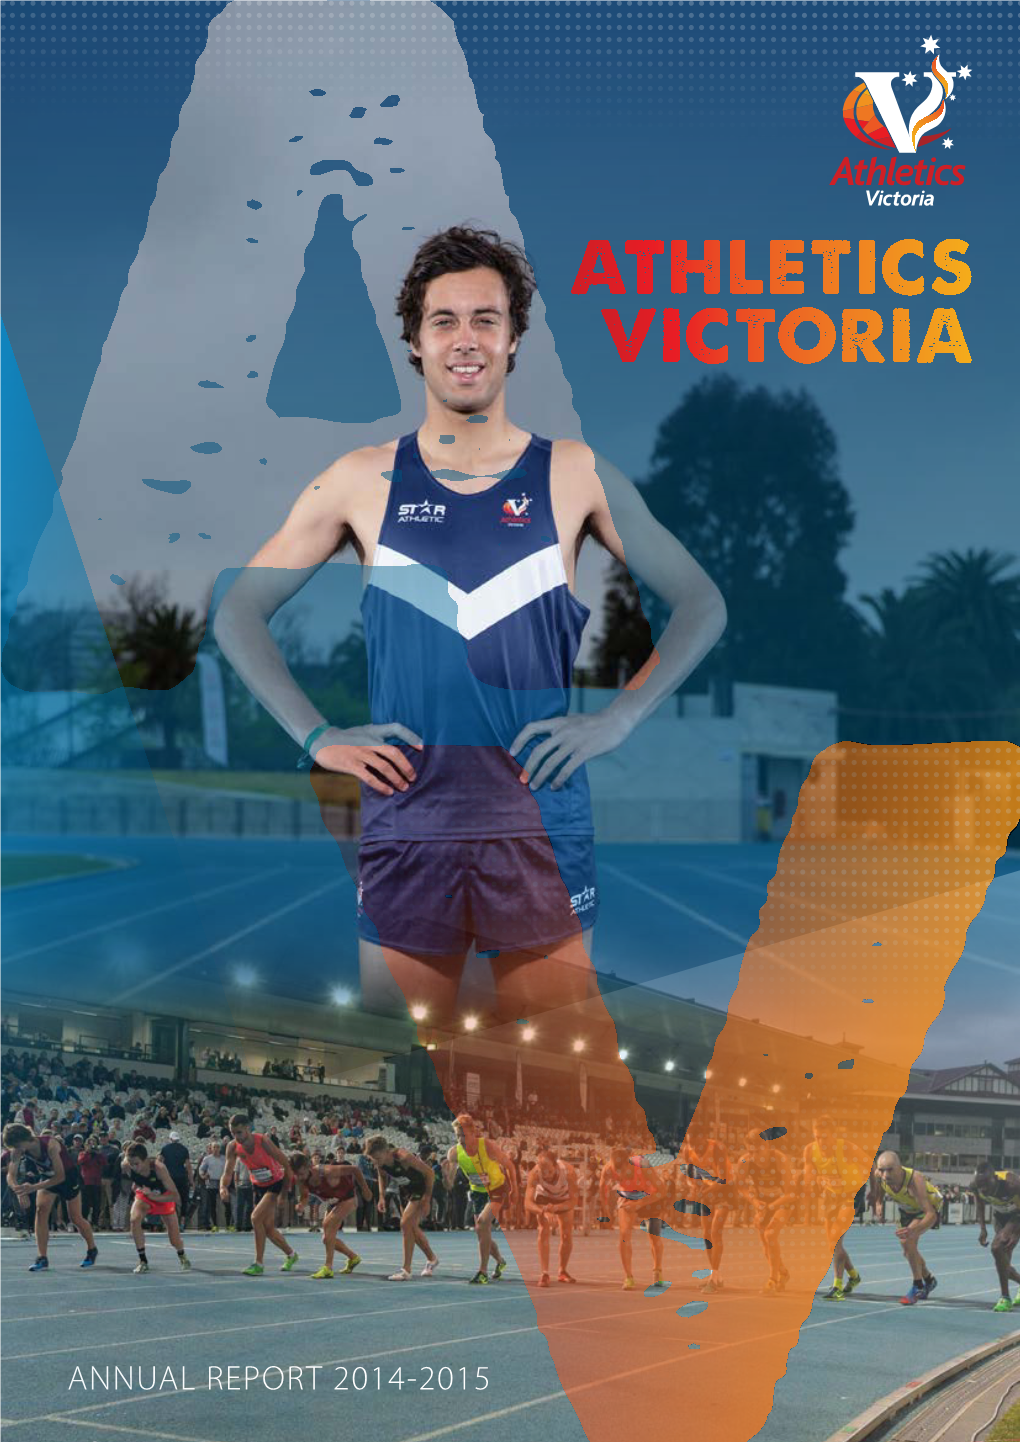 ANNUAL REPORT 2014-2015 MISSION STATEMENT: for Athletics to Be the Premier Recreational and Competitive Participation Sport in Victoria